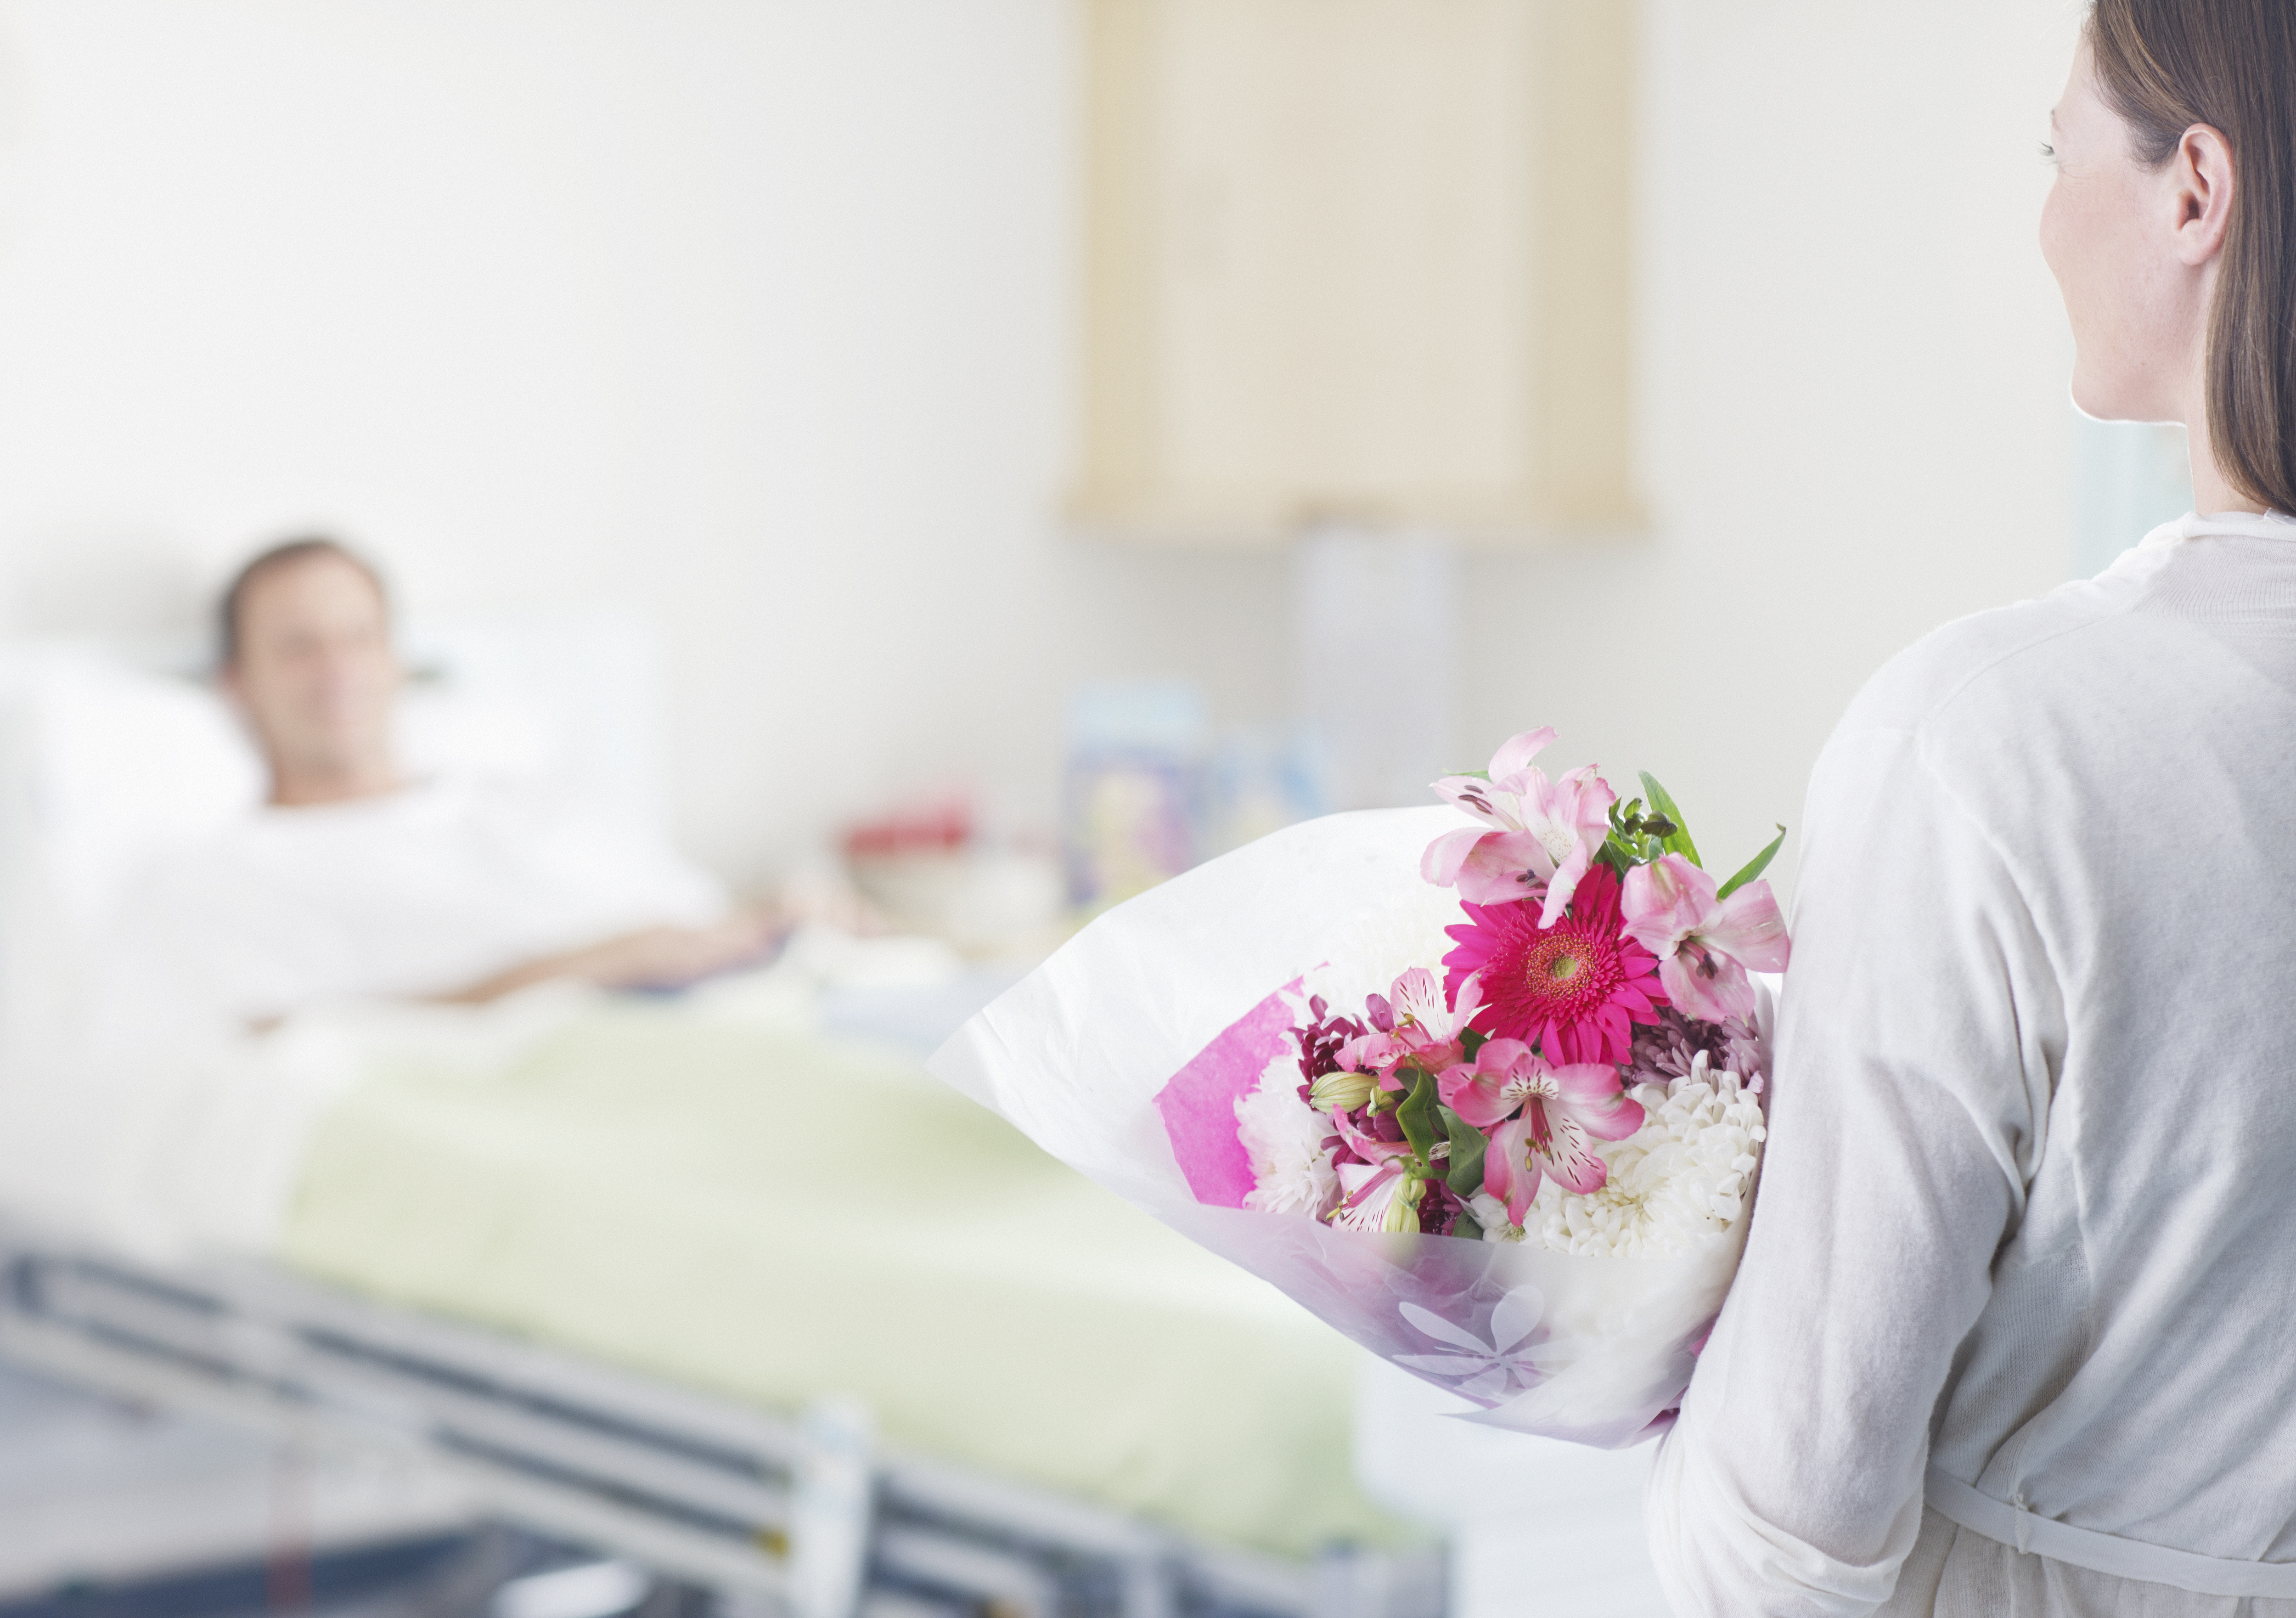 A woman bringing flowers to a man in a hospital | Source: Getty Images